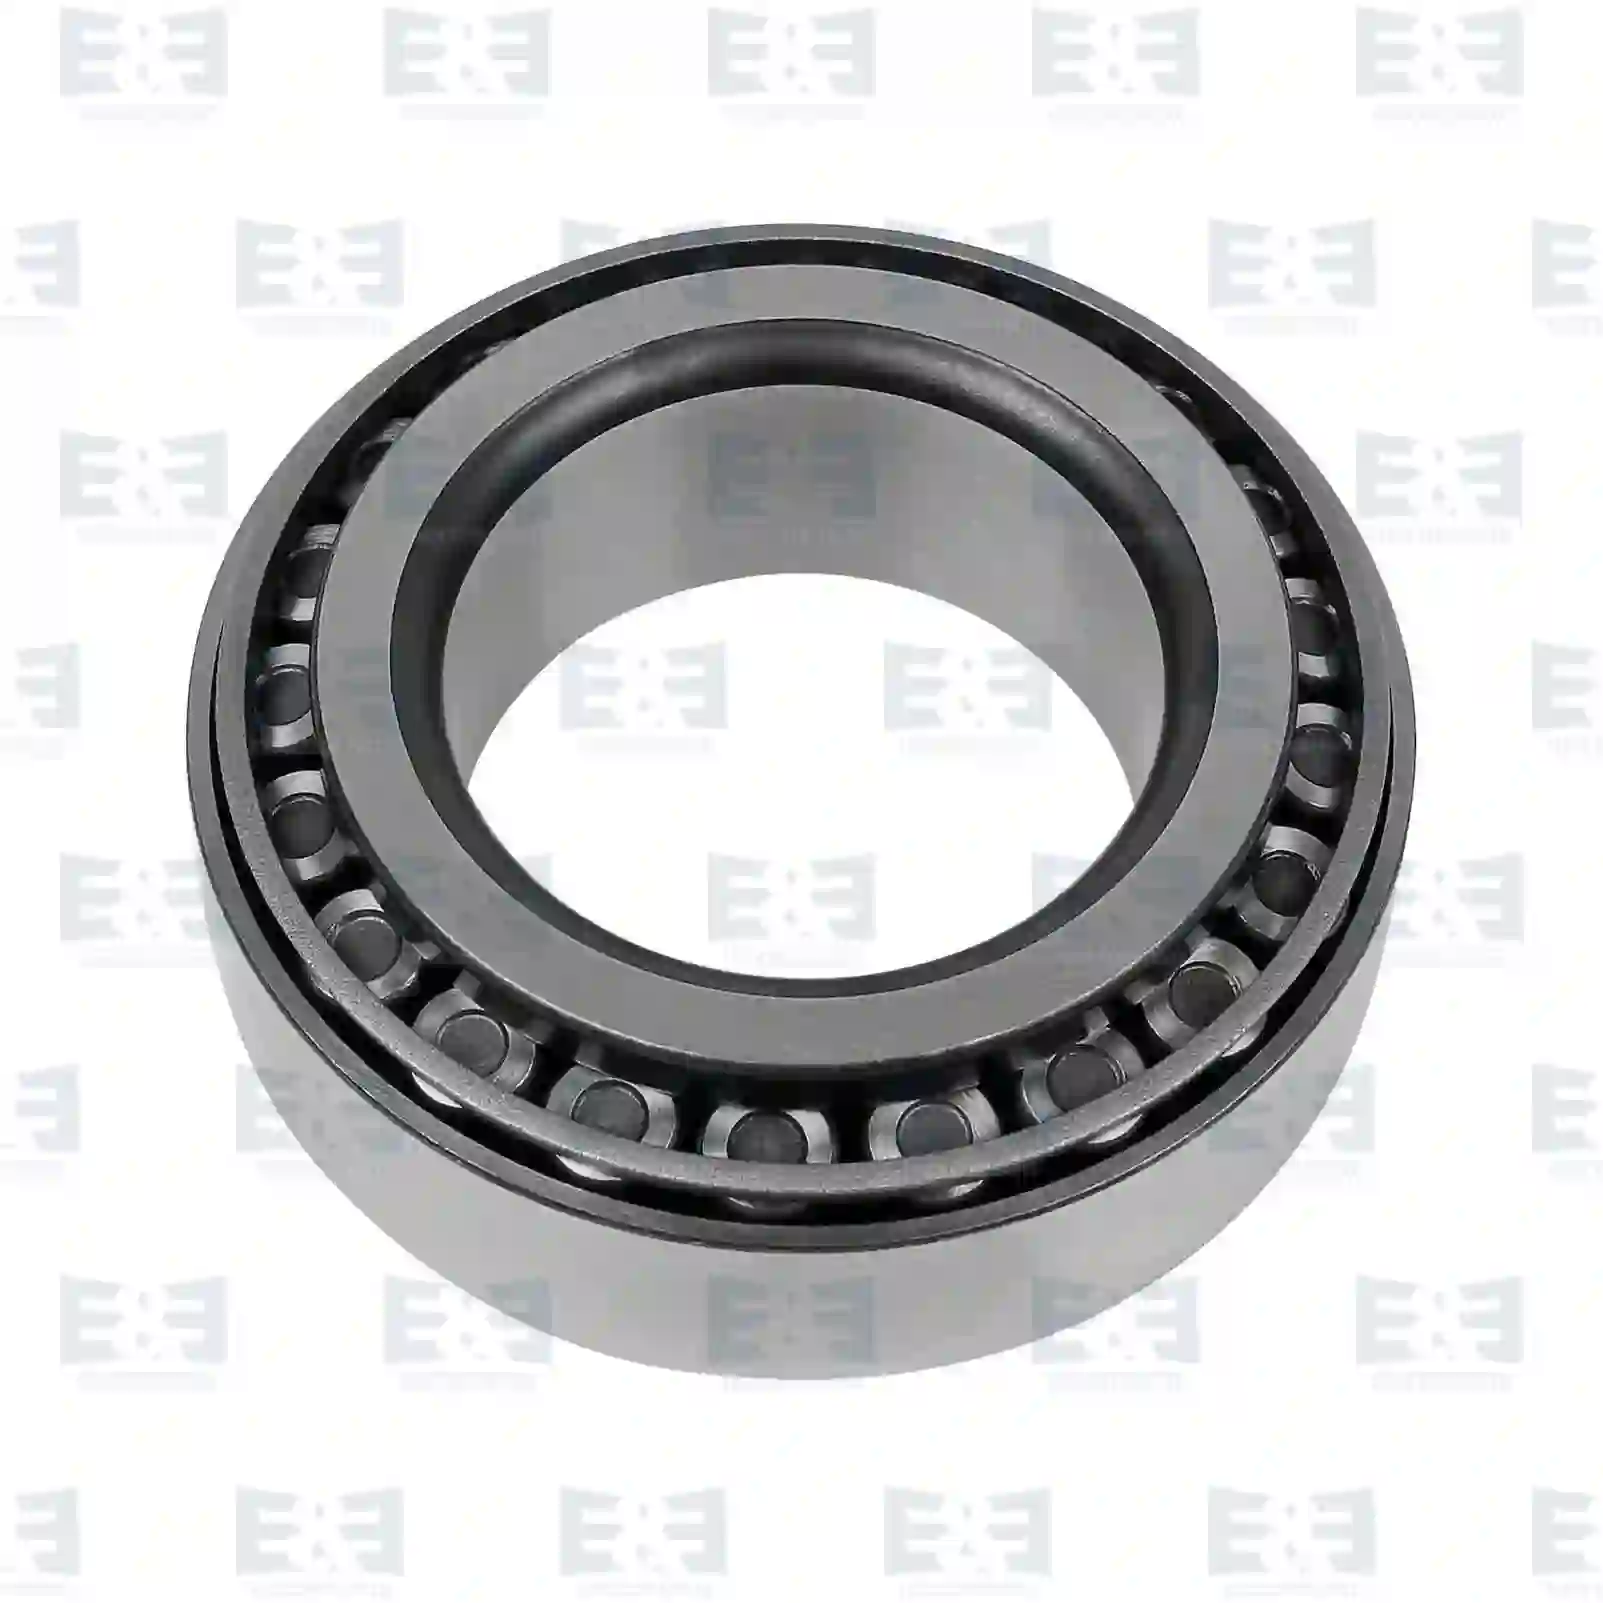 Bearings Tapered roller bearing, EE No 2E2285803 ,  oem no:07160360, 07160370, 07160360, 07160370, 7160360, 07160370, 0009807502, 0009818302, 0029818205, 0069818205, 0089813605, 0099819505, 6849814205, 7160360, ZG03009-0008 E&E Truck Spare Parts | Truck Spare Parts, Auotomotive Spare Parts